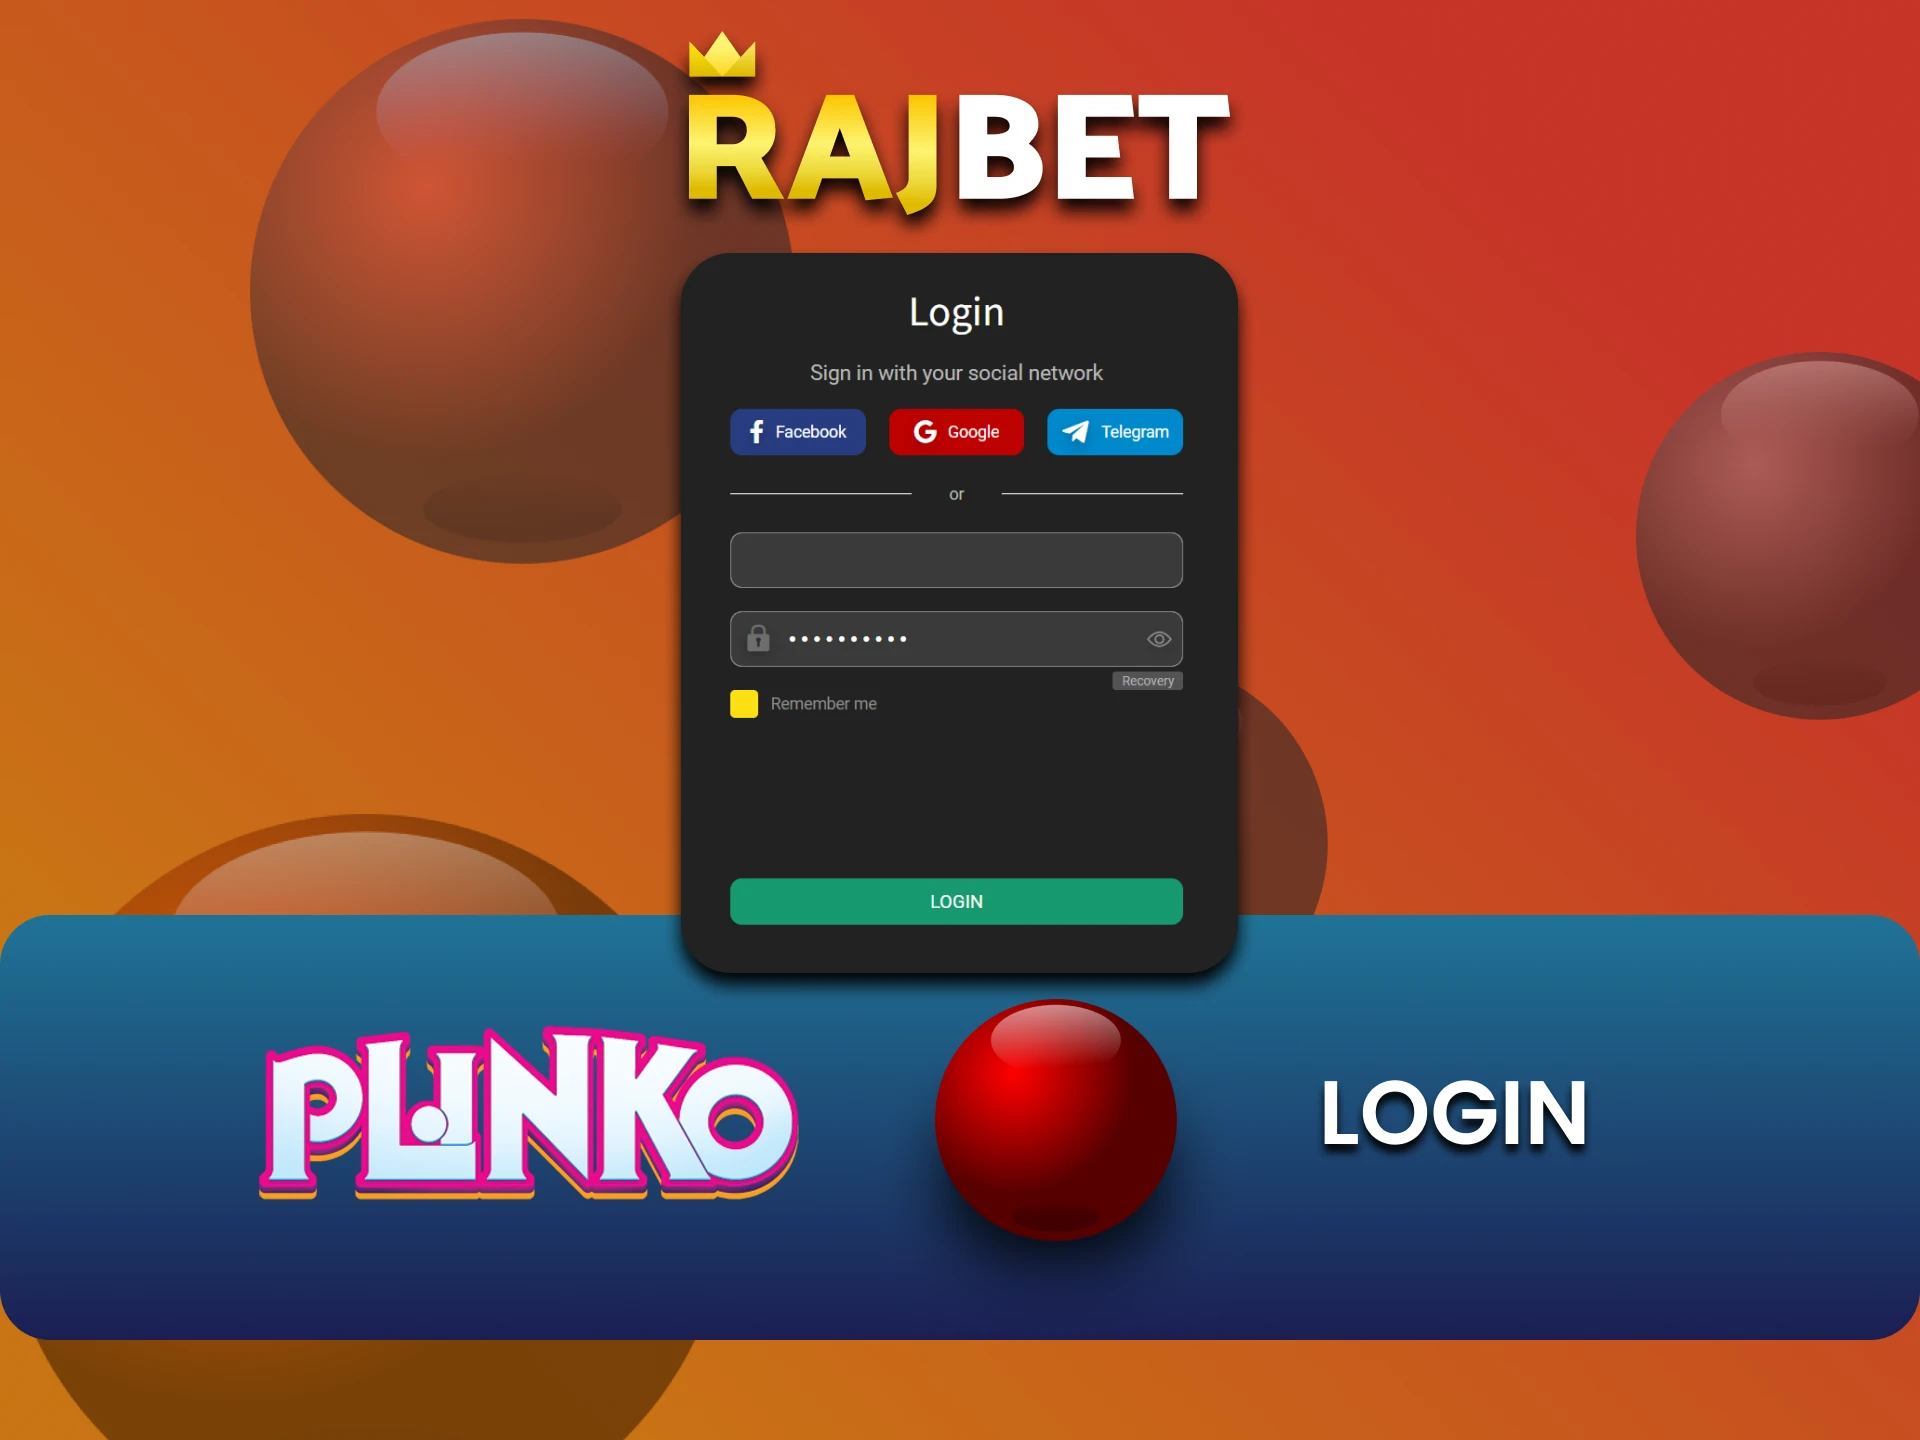 Sign in to your Rajbet account for Plinko.